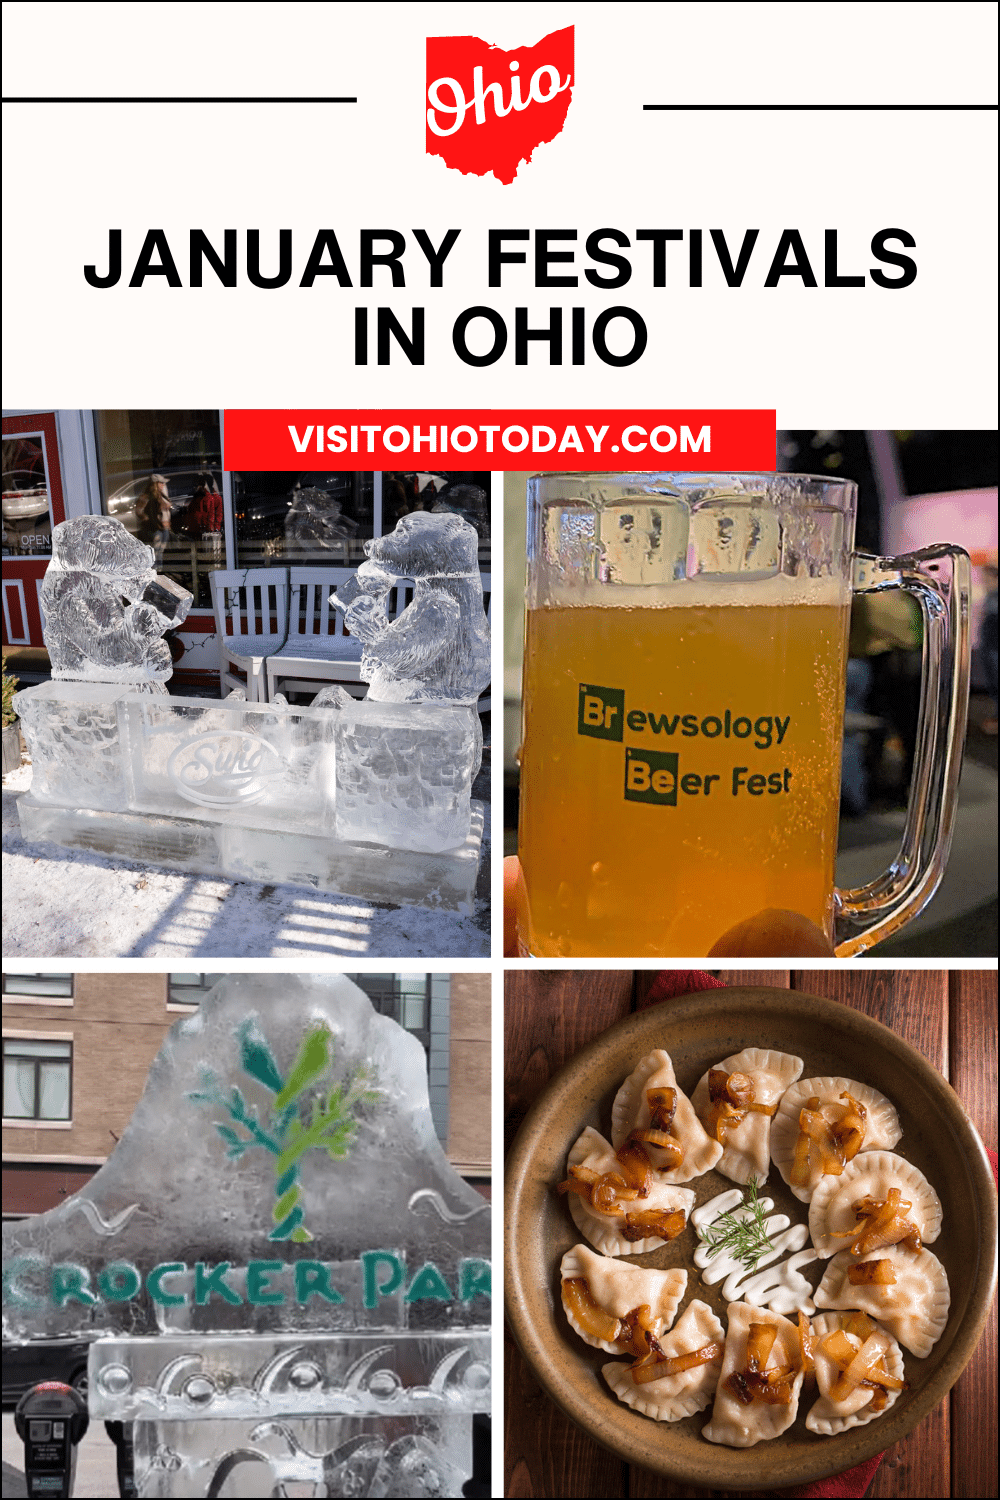 January is a time to celebrate snow, ice, and all things winter! Here is a list of January Festivals in Ohio that may help you find ways to enjoy this cold time of year.